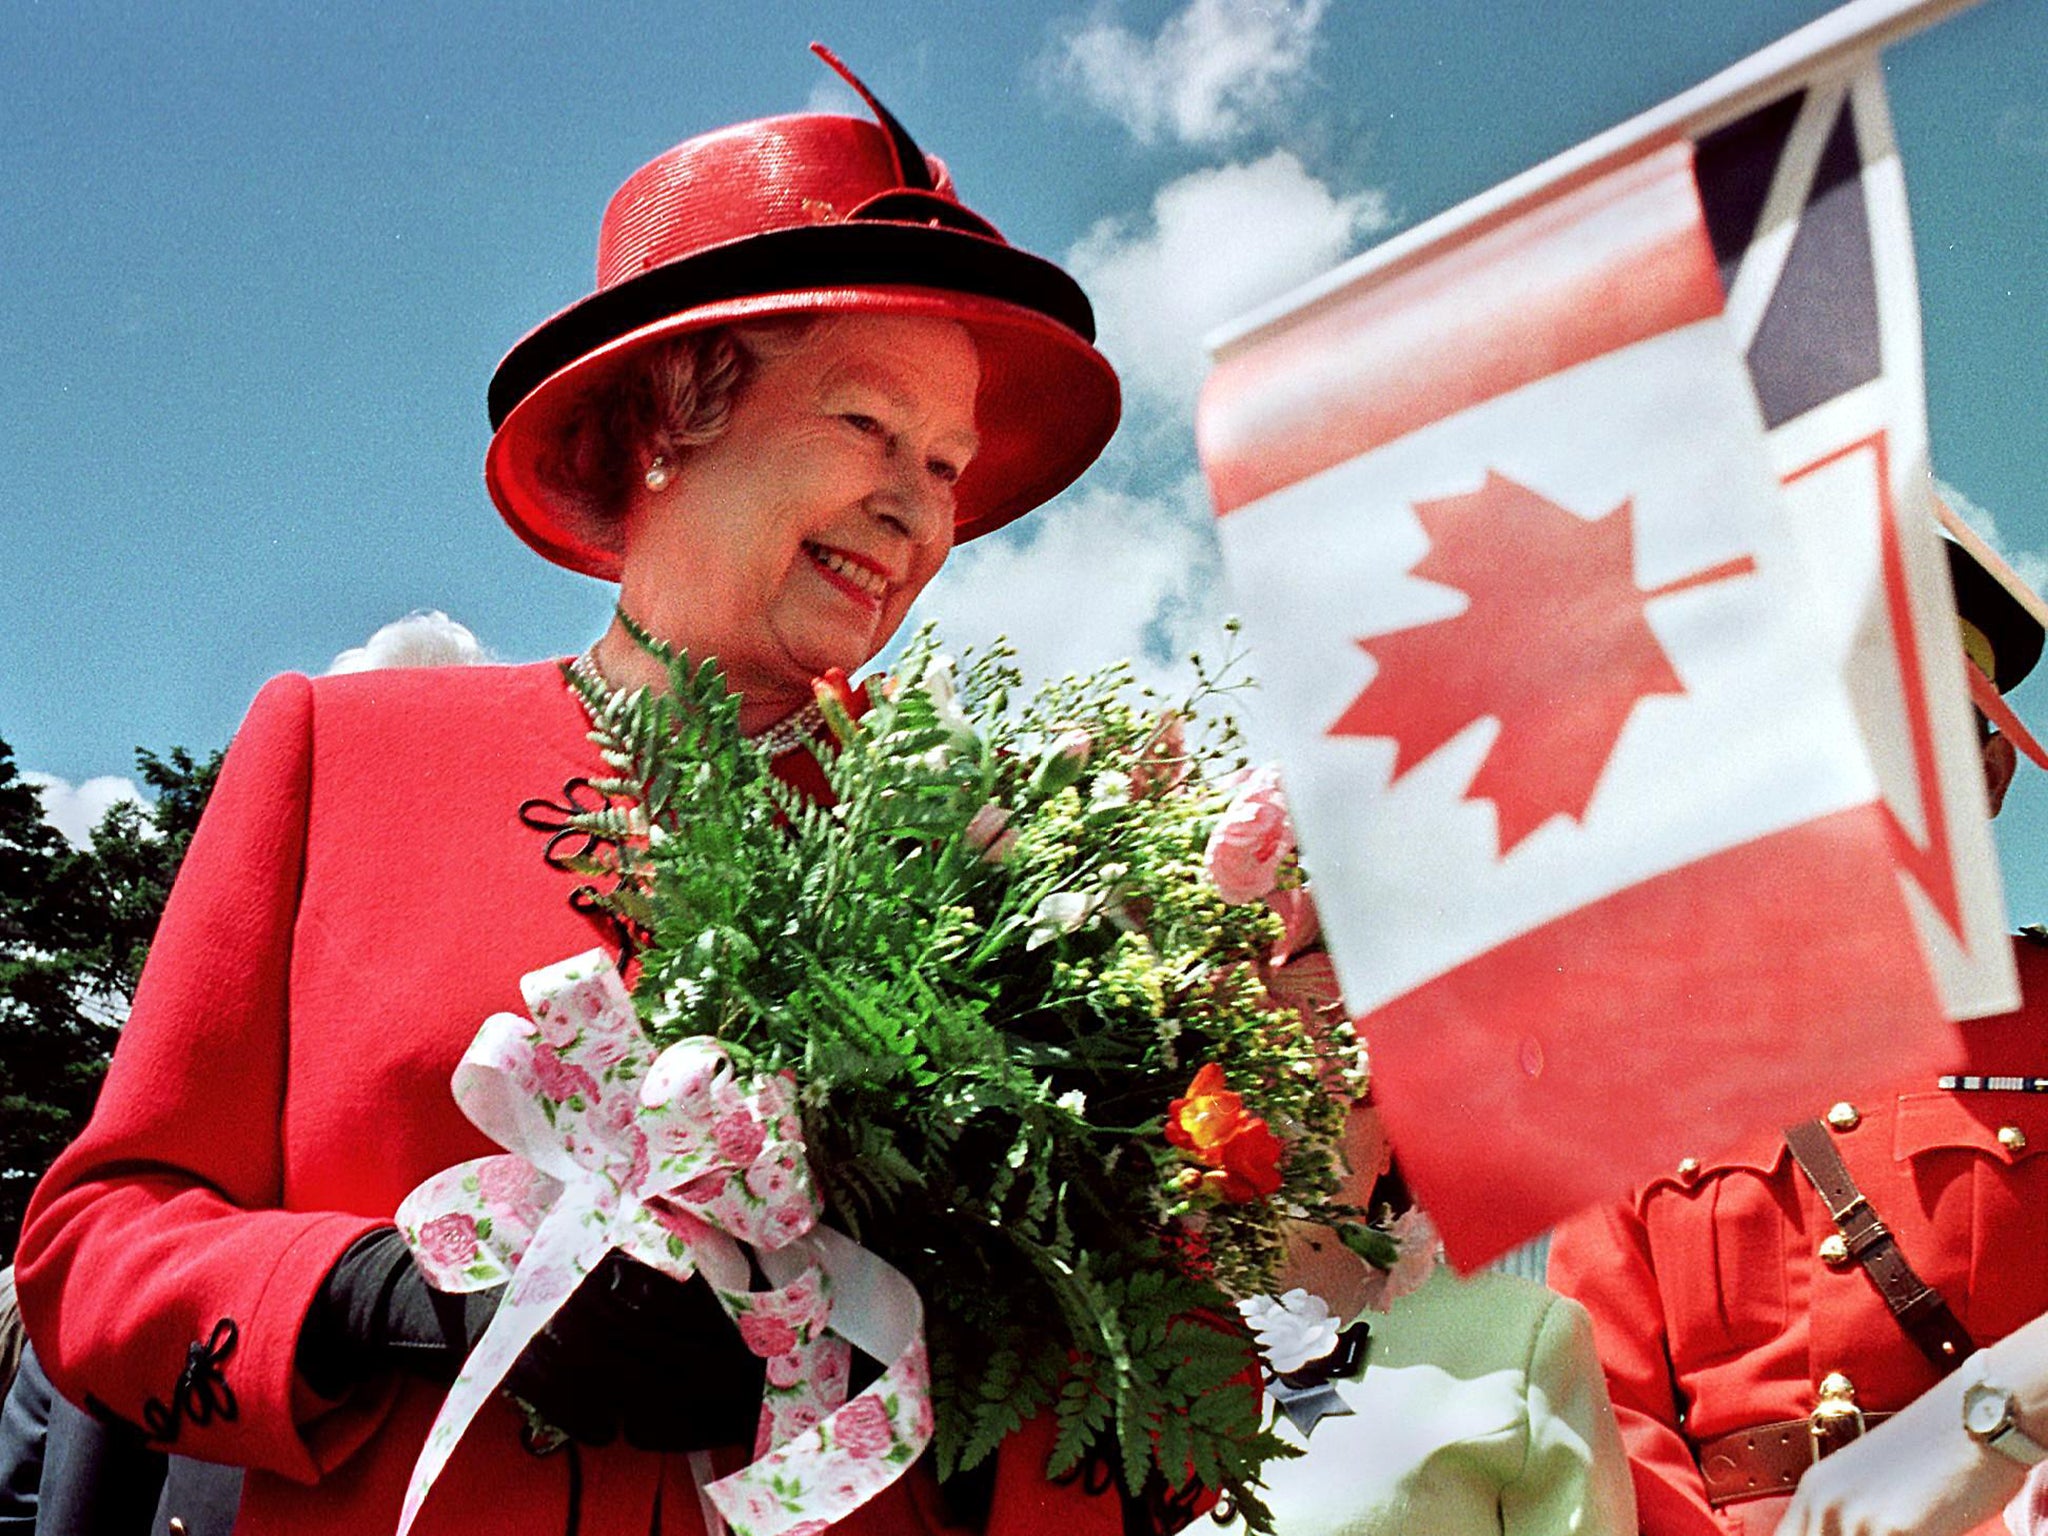 Queen Elizabeth II smiles as she visits Bowring Park in St John's, Newfoundland, on the third day of a 10-day official visit to Canada, 1997